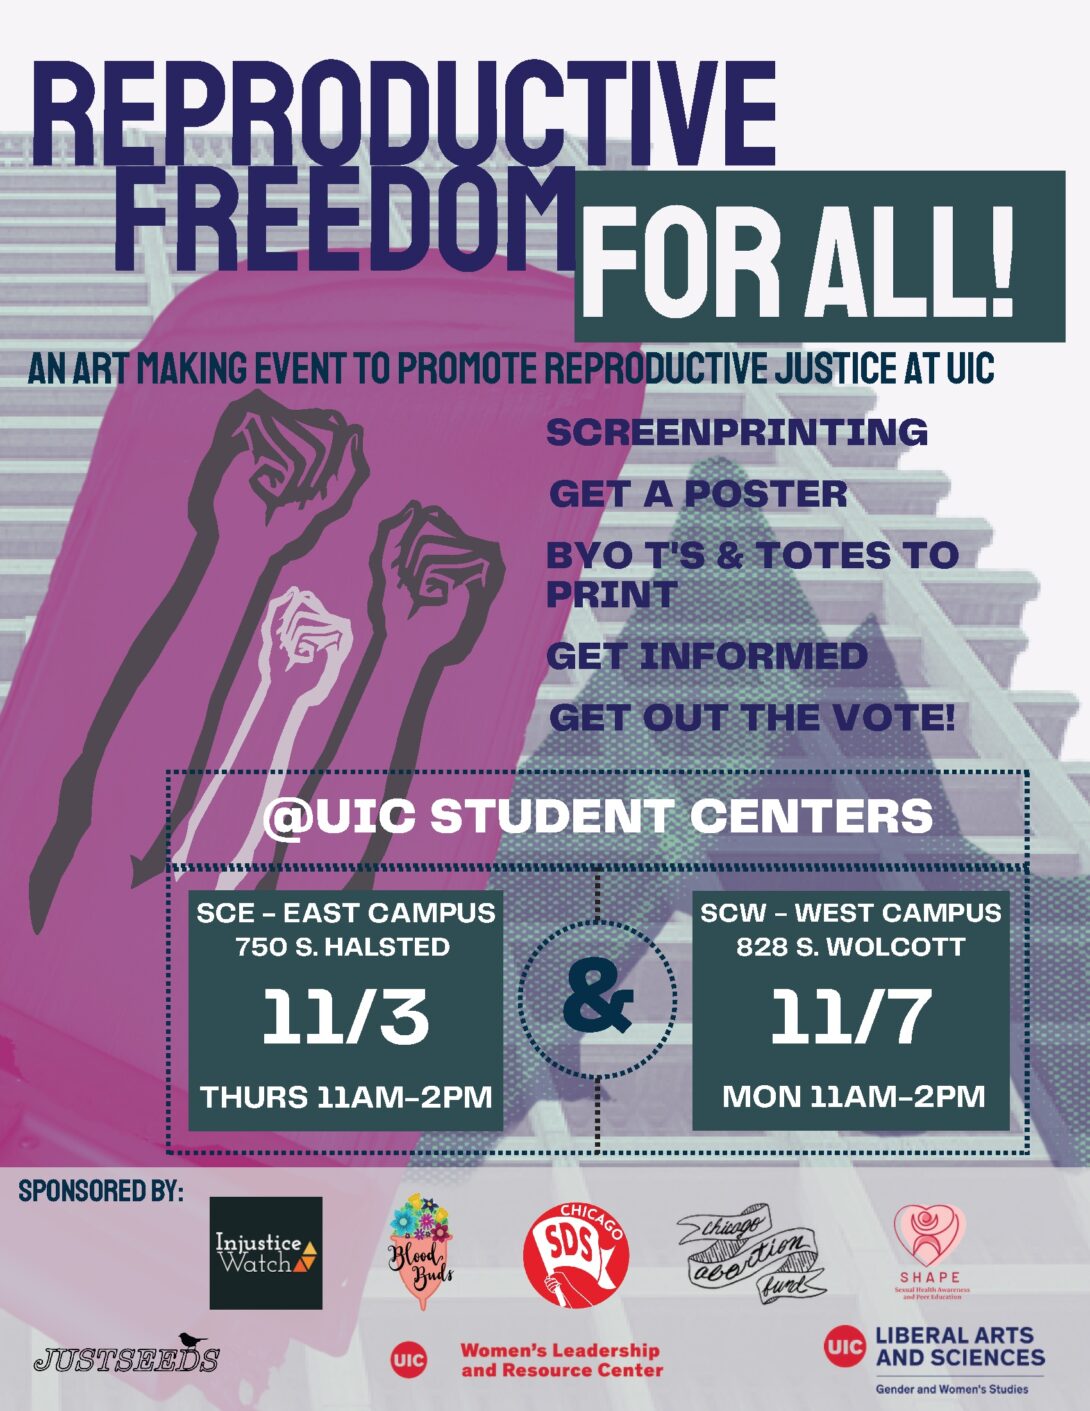 Promotional flyer: The outline of 3 raised fists on a purple background. Dark purple and white text describes the event (same info on this page). At the bottom are the sponsor logos. In the background of the entire flyer is a faded image of UIC's University Hall.